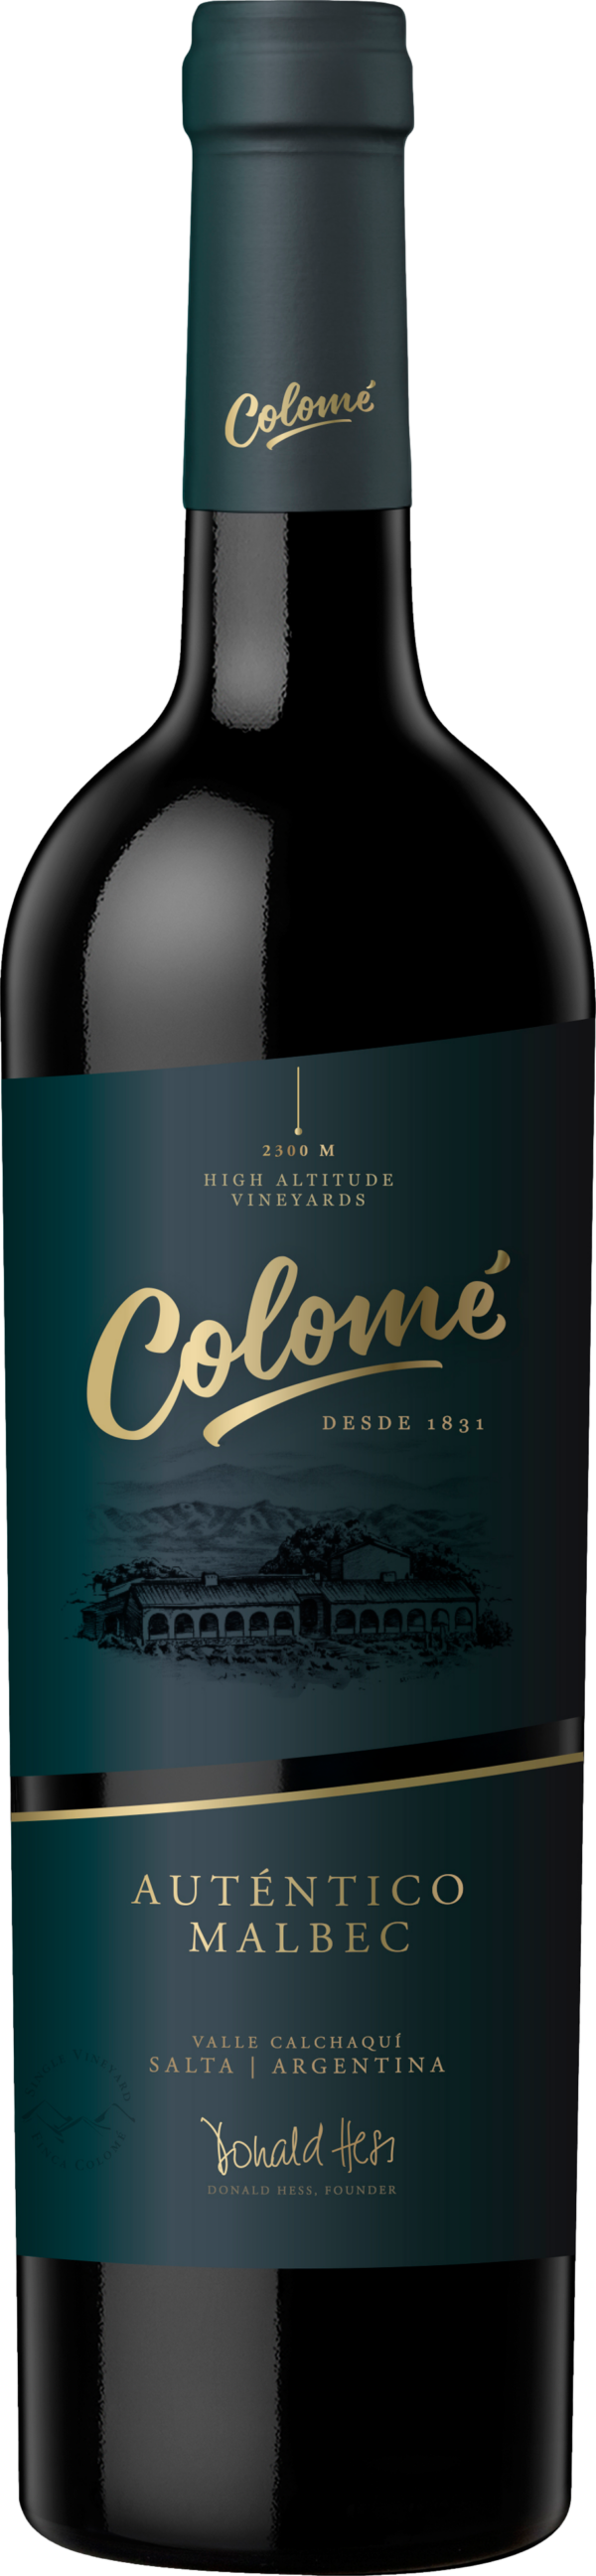 Product image of Colome Autentico Malbec 2020 from 8wines